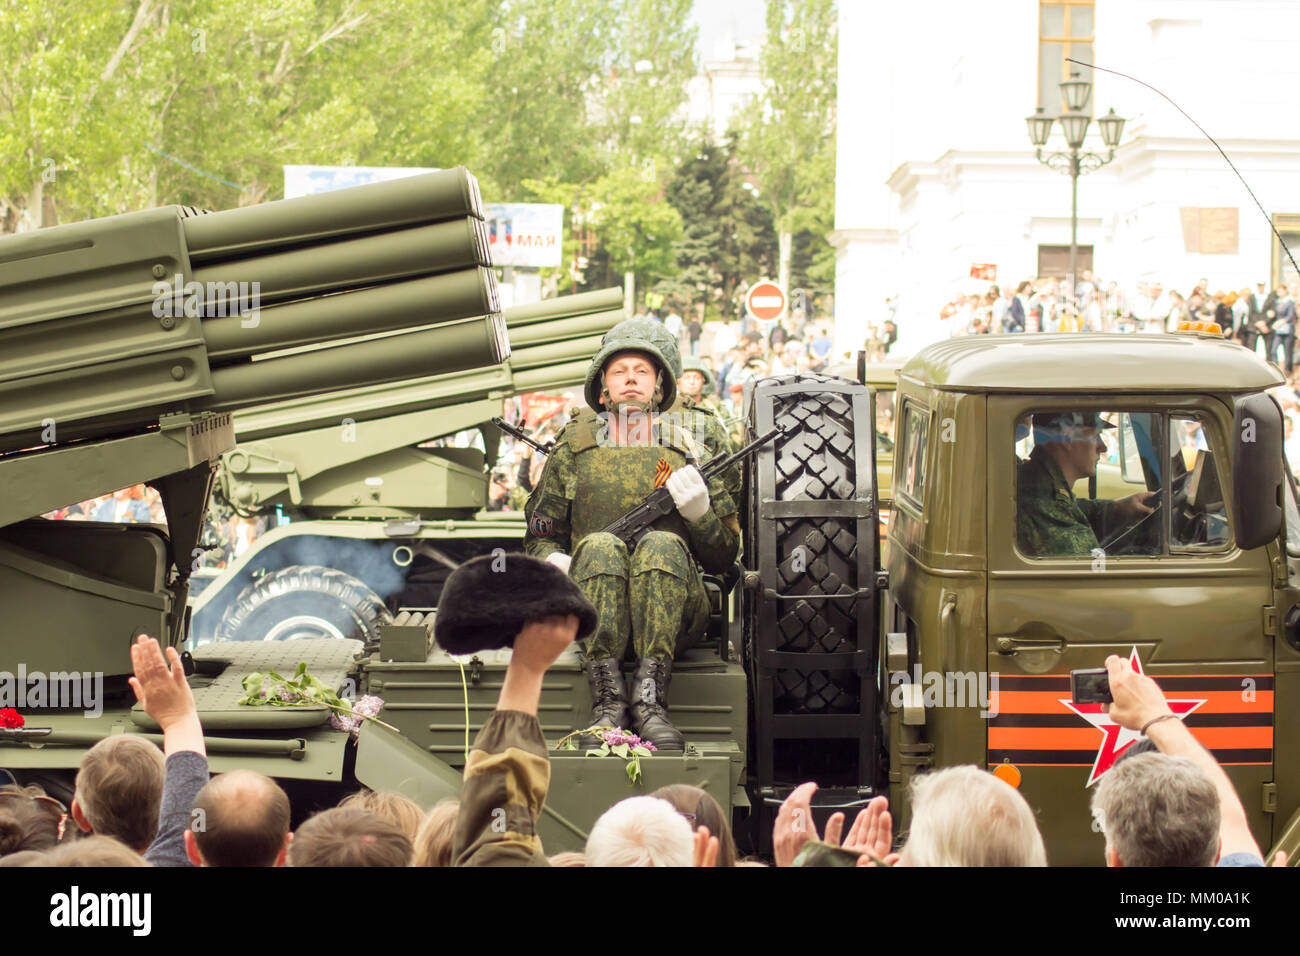 DONETSK, Donetsk People Republic. May 9, 2018: Soviet anti-air gun track with gunners on the main street of the Donetsk city during the Victory Day Parade.DONETSK, Donetsk People Republic. May 9, 2018: Soviet artillery MLRS BM-21 Grad on the main street of the Donetsk city during the Victory Day Parade. Credit: An147/Alamy Live News Stock Photo